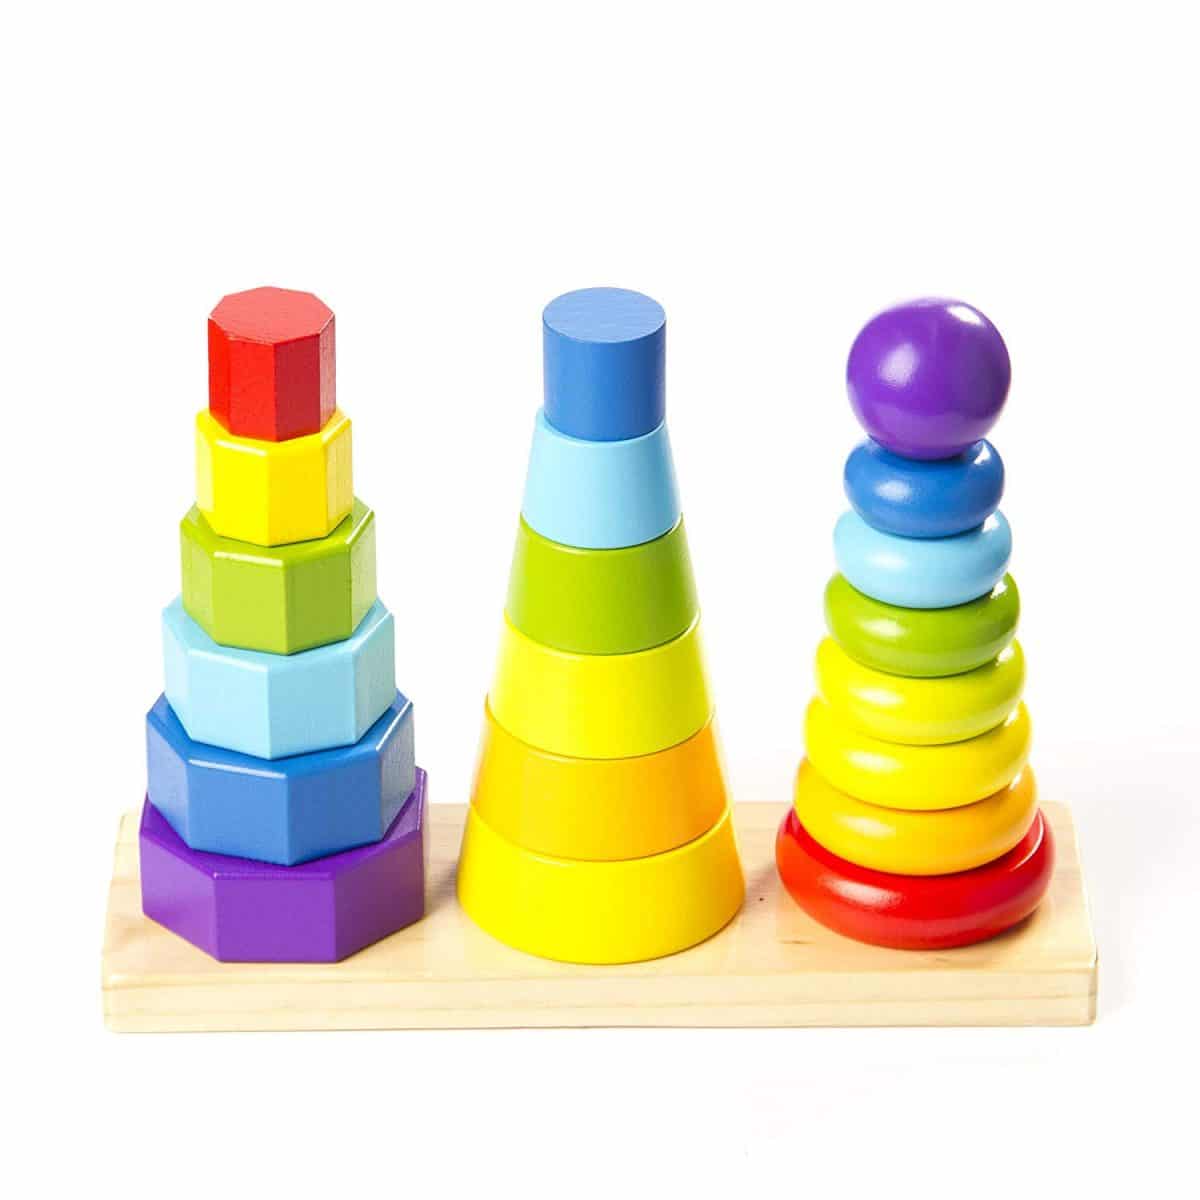 best stacking toys for toddlers